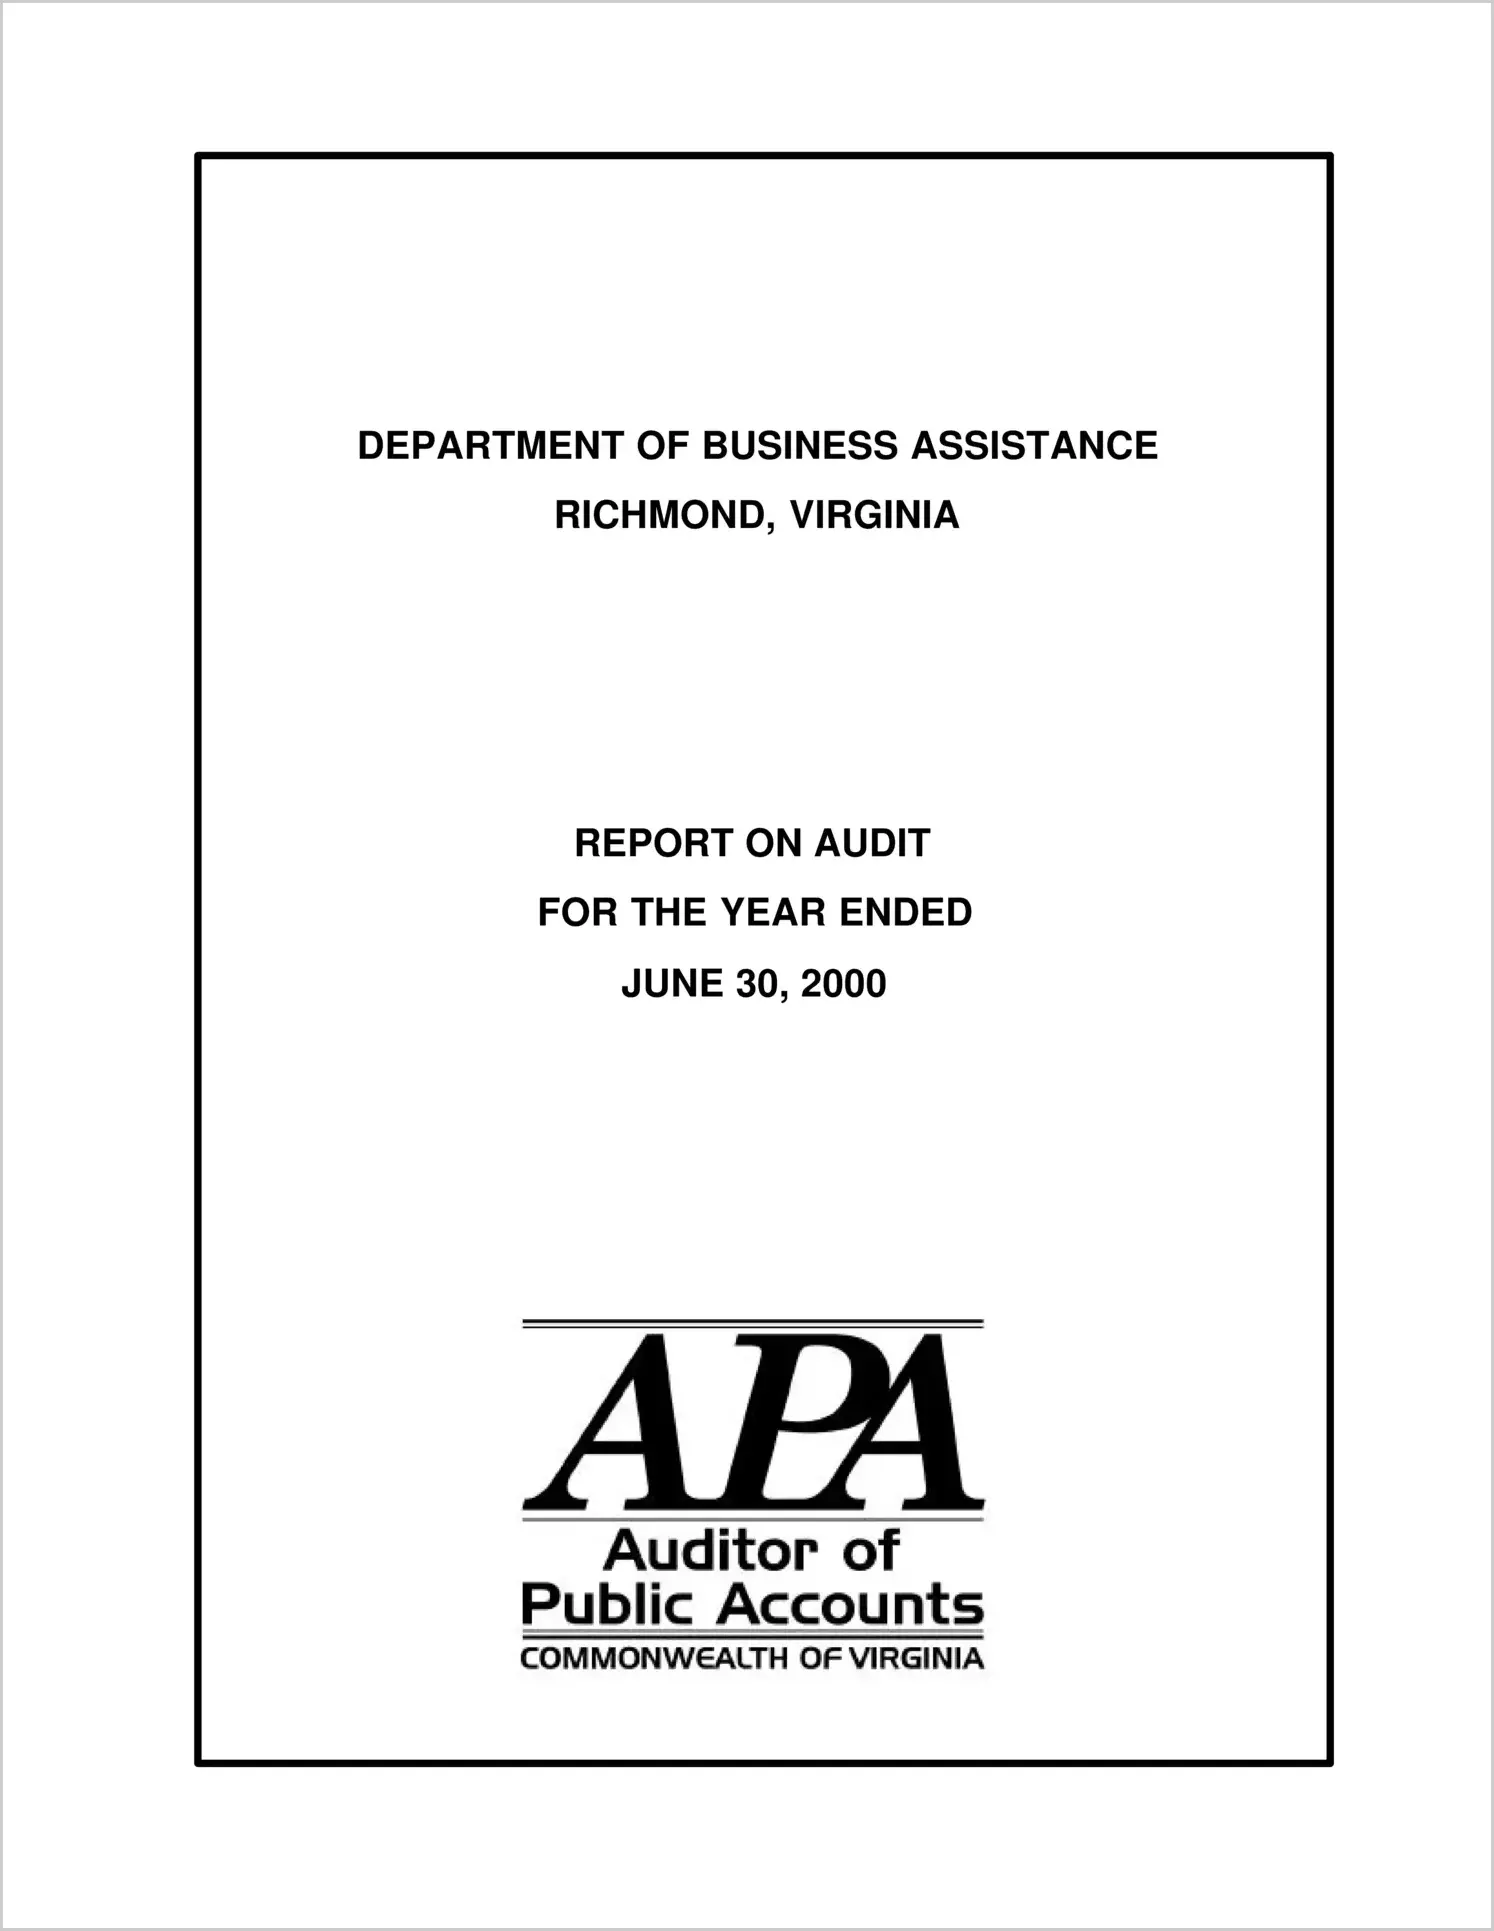 Department of Business Assistance for the year ended June 30, 2000